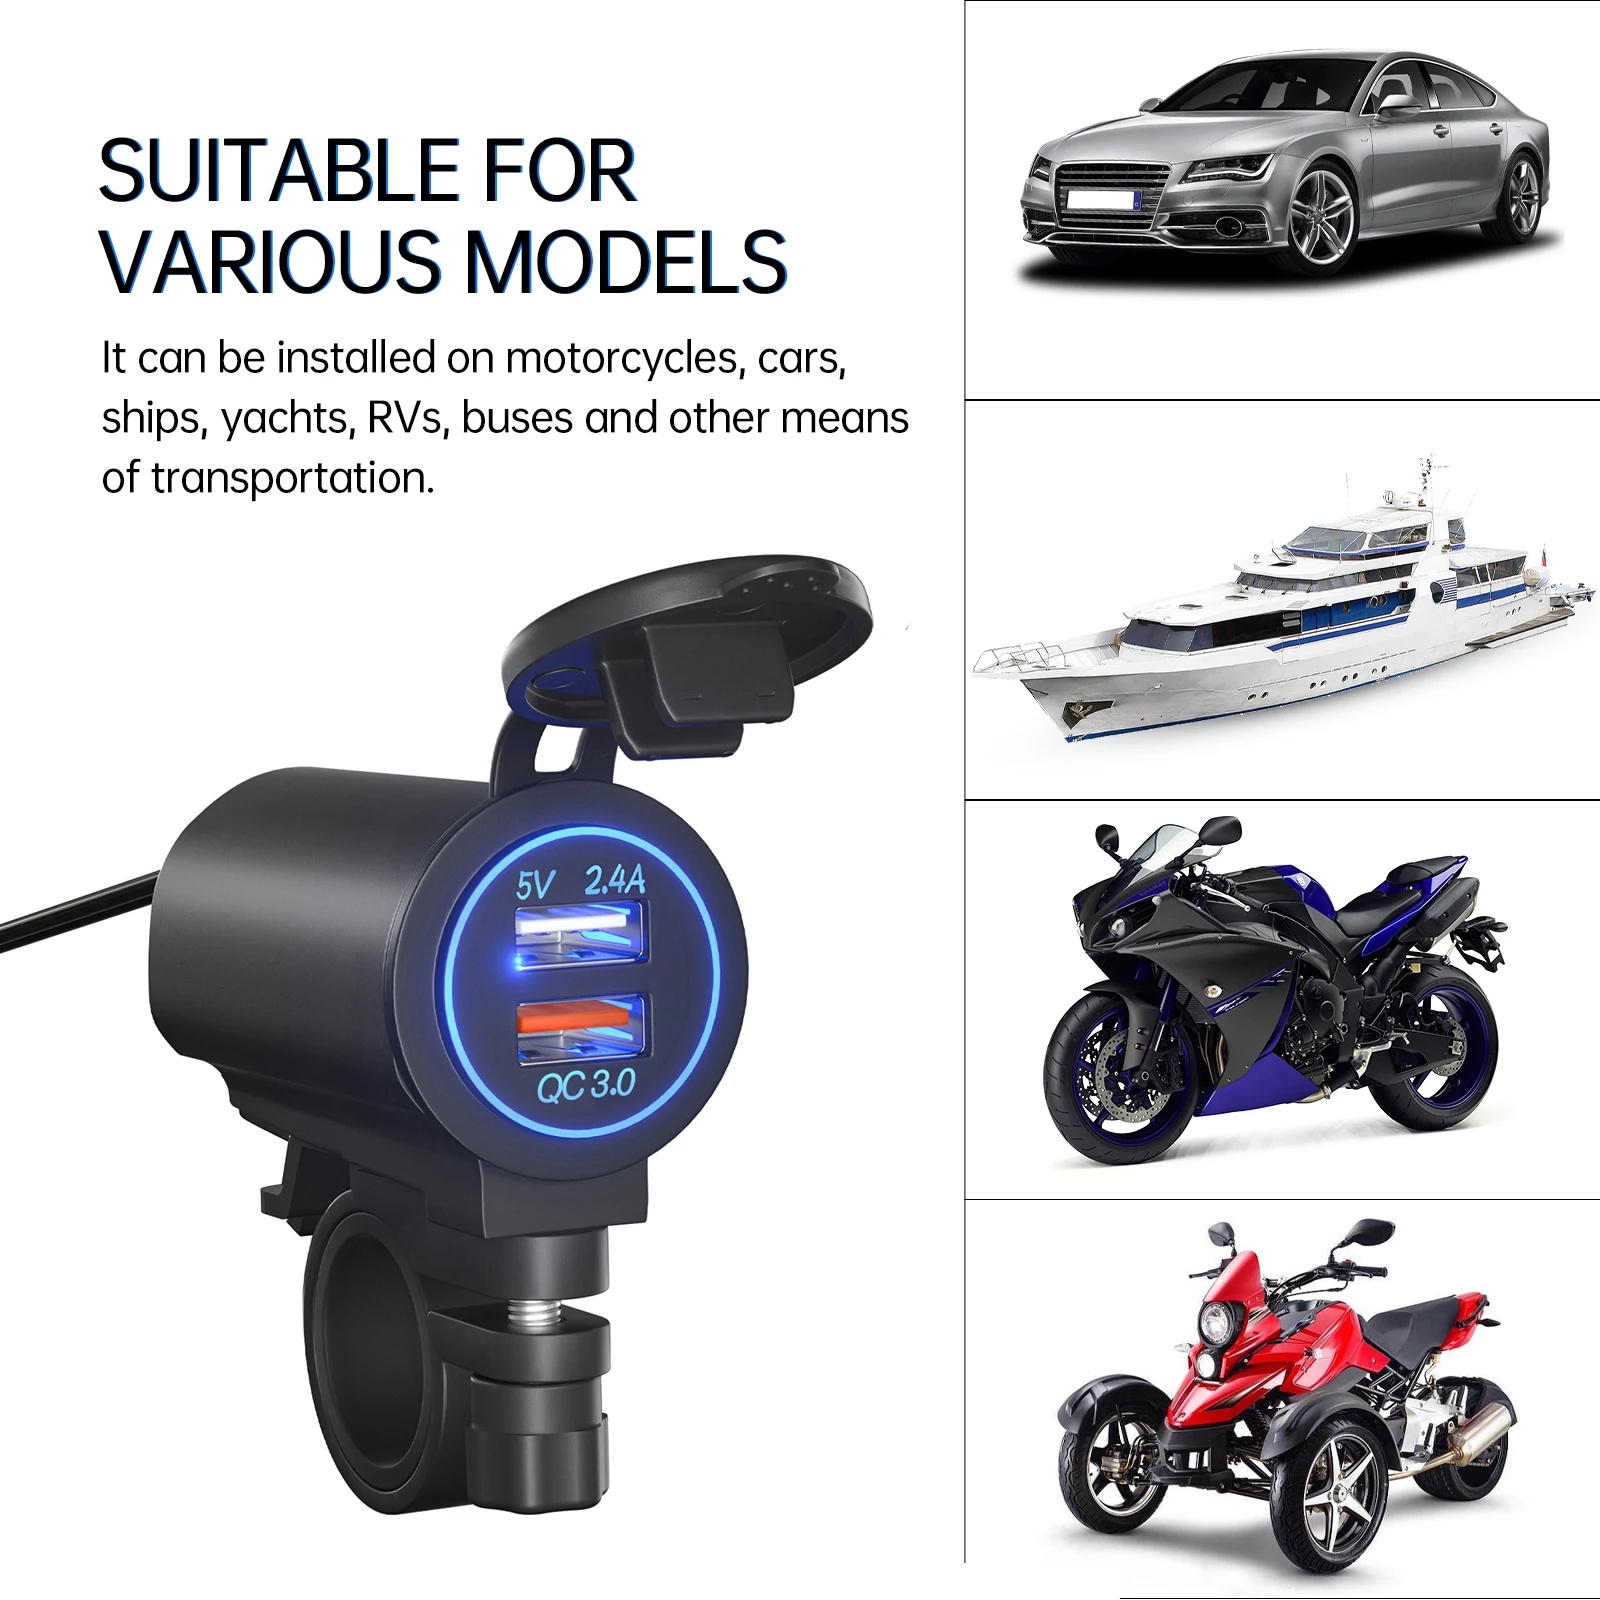 

Motorcycle modified usb car charger car QC3.0 fast charging dual port plus cell phone charging interface jack For Z1000 Z900